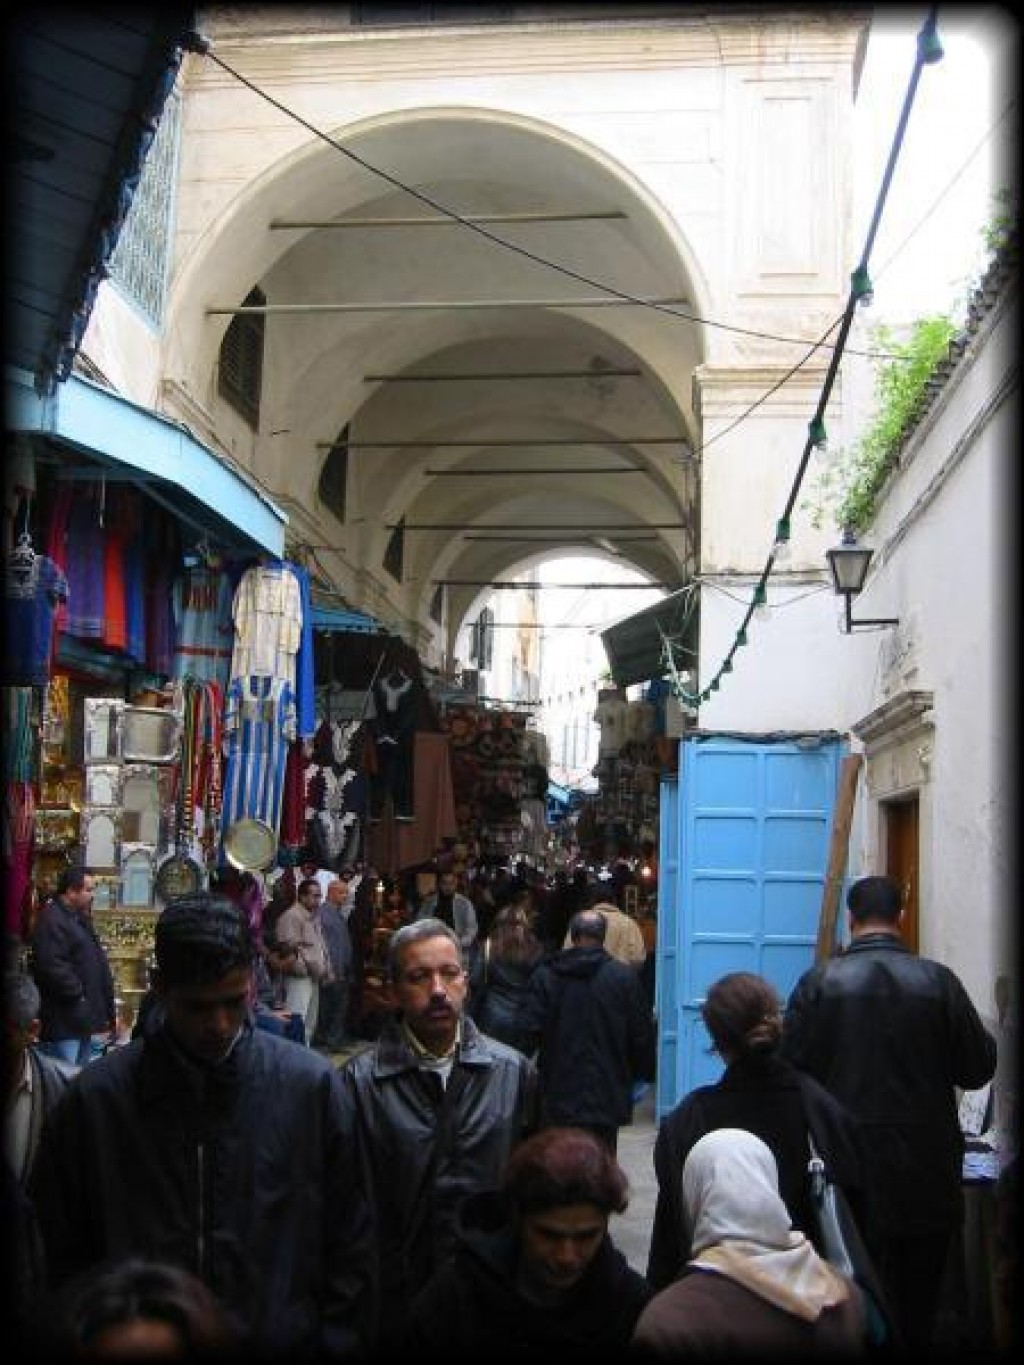 This is just inside the Medina from the gate.